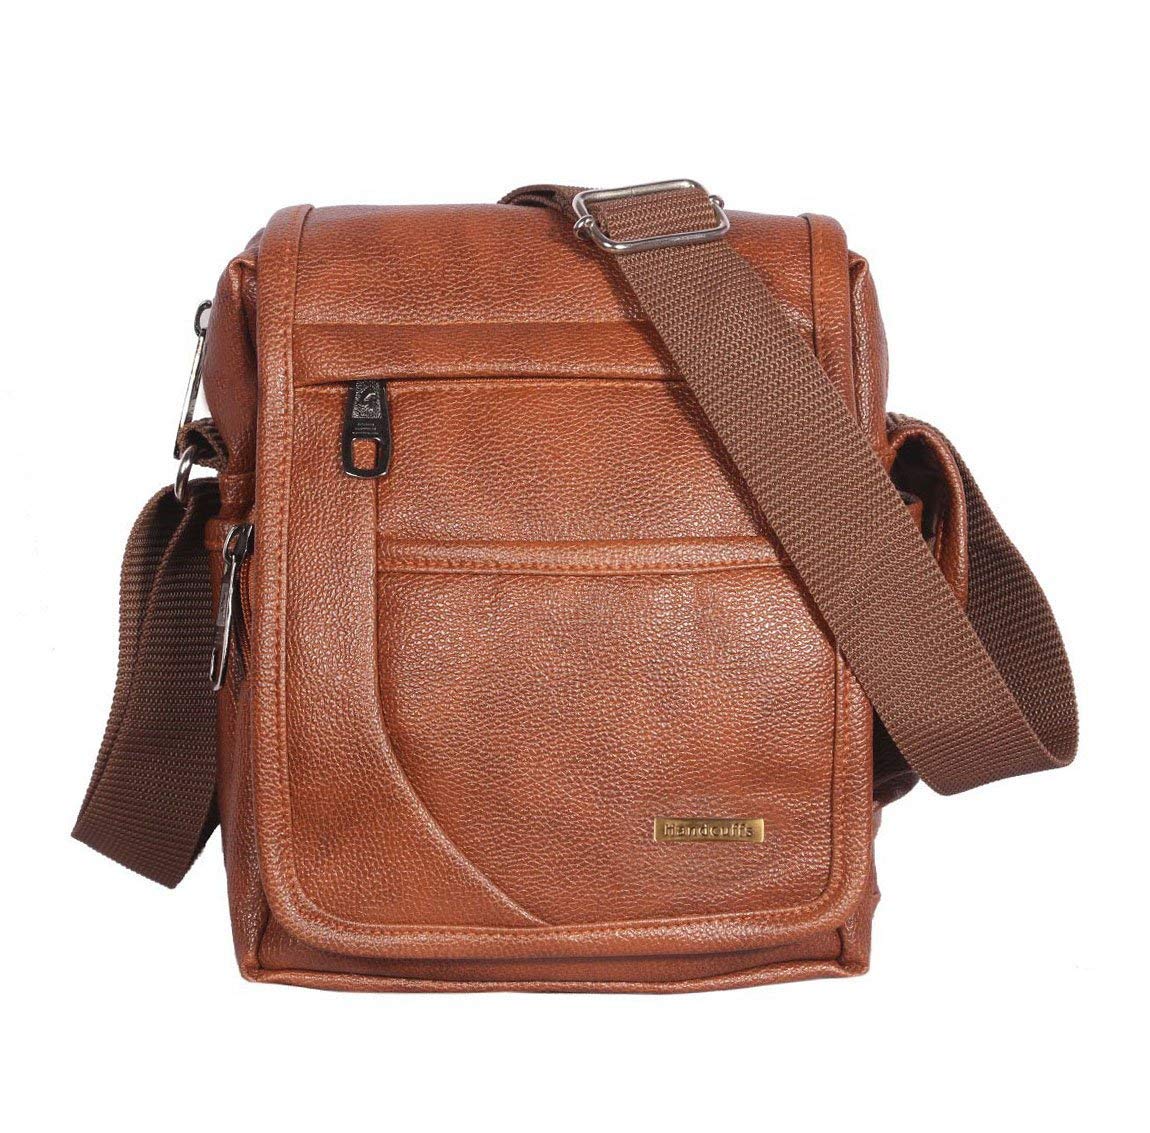 Handcuffs Mens Bag Messenger Bag Leather Shoulder Bags Travel Bag Crossbody Bags for Men Work Business - 10 Inch Price in India